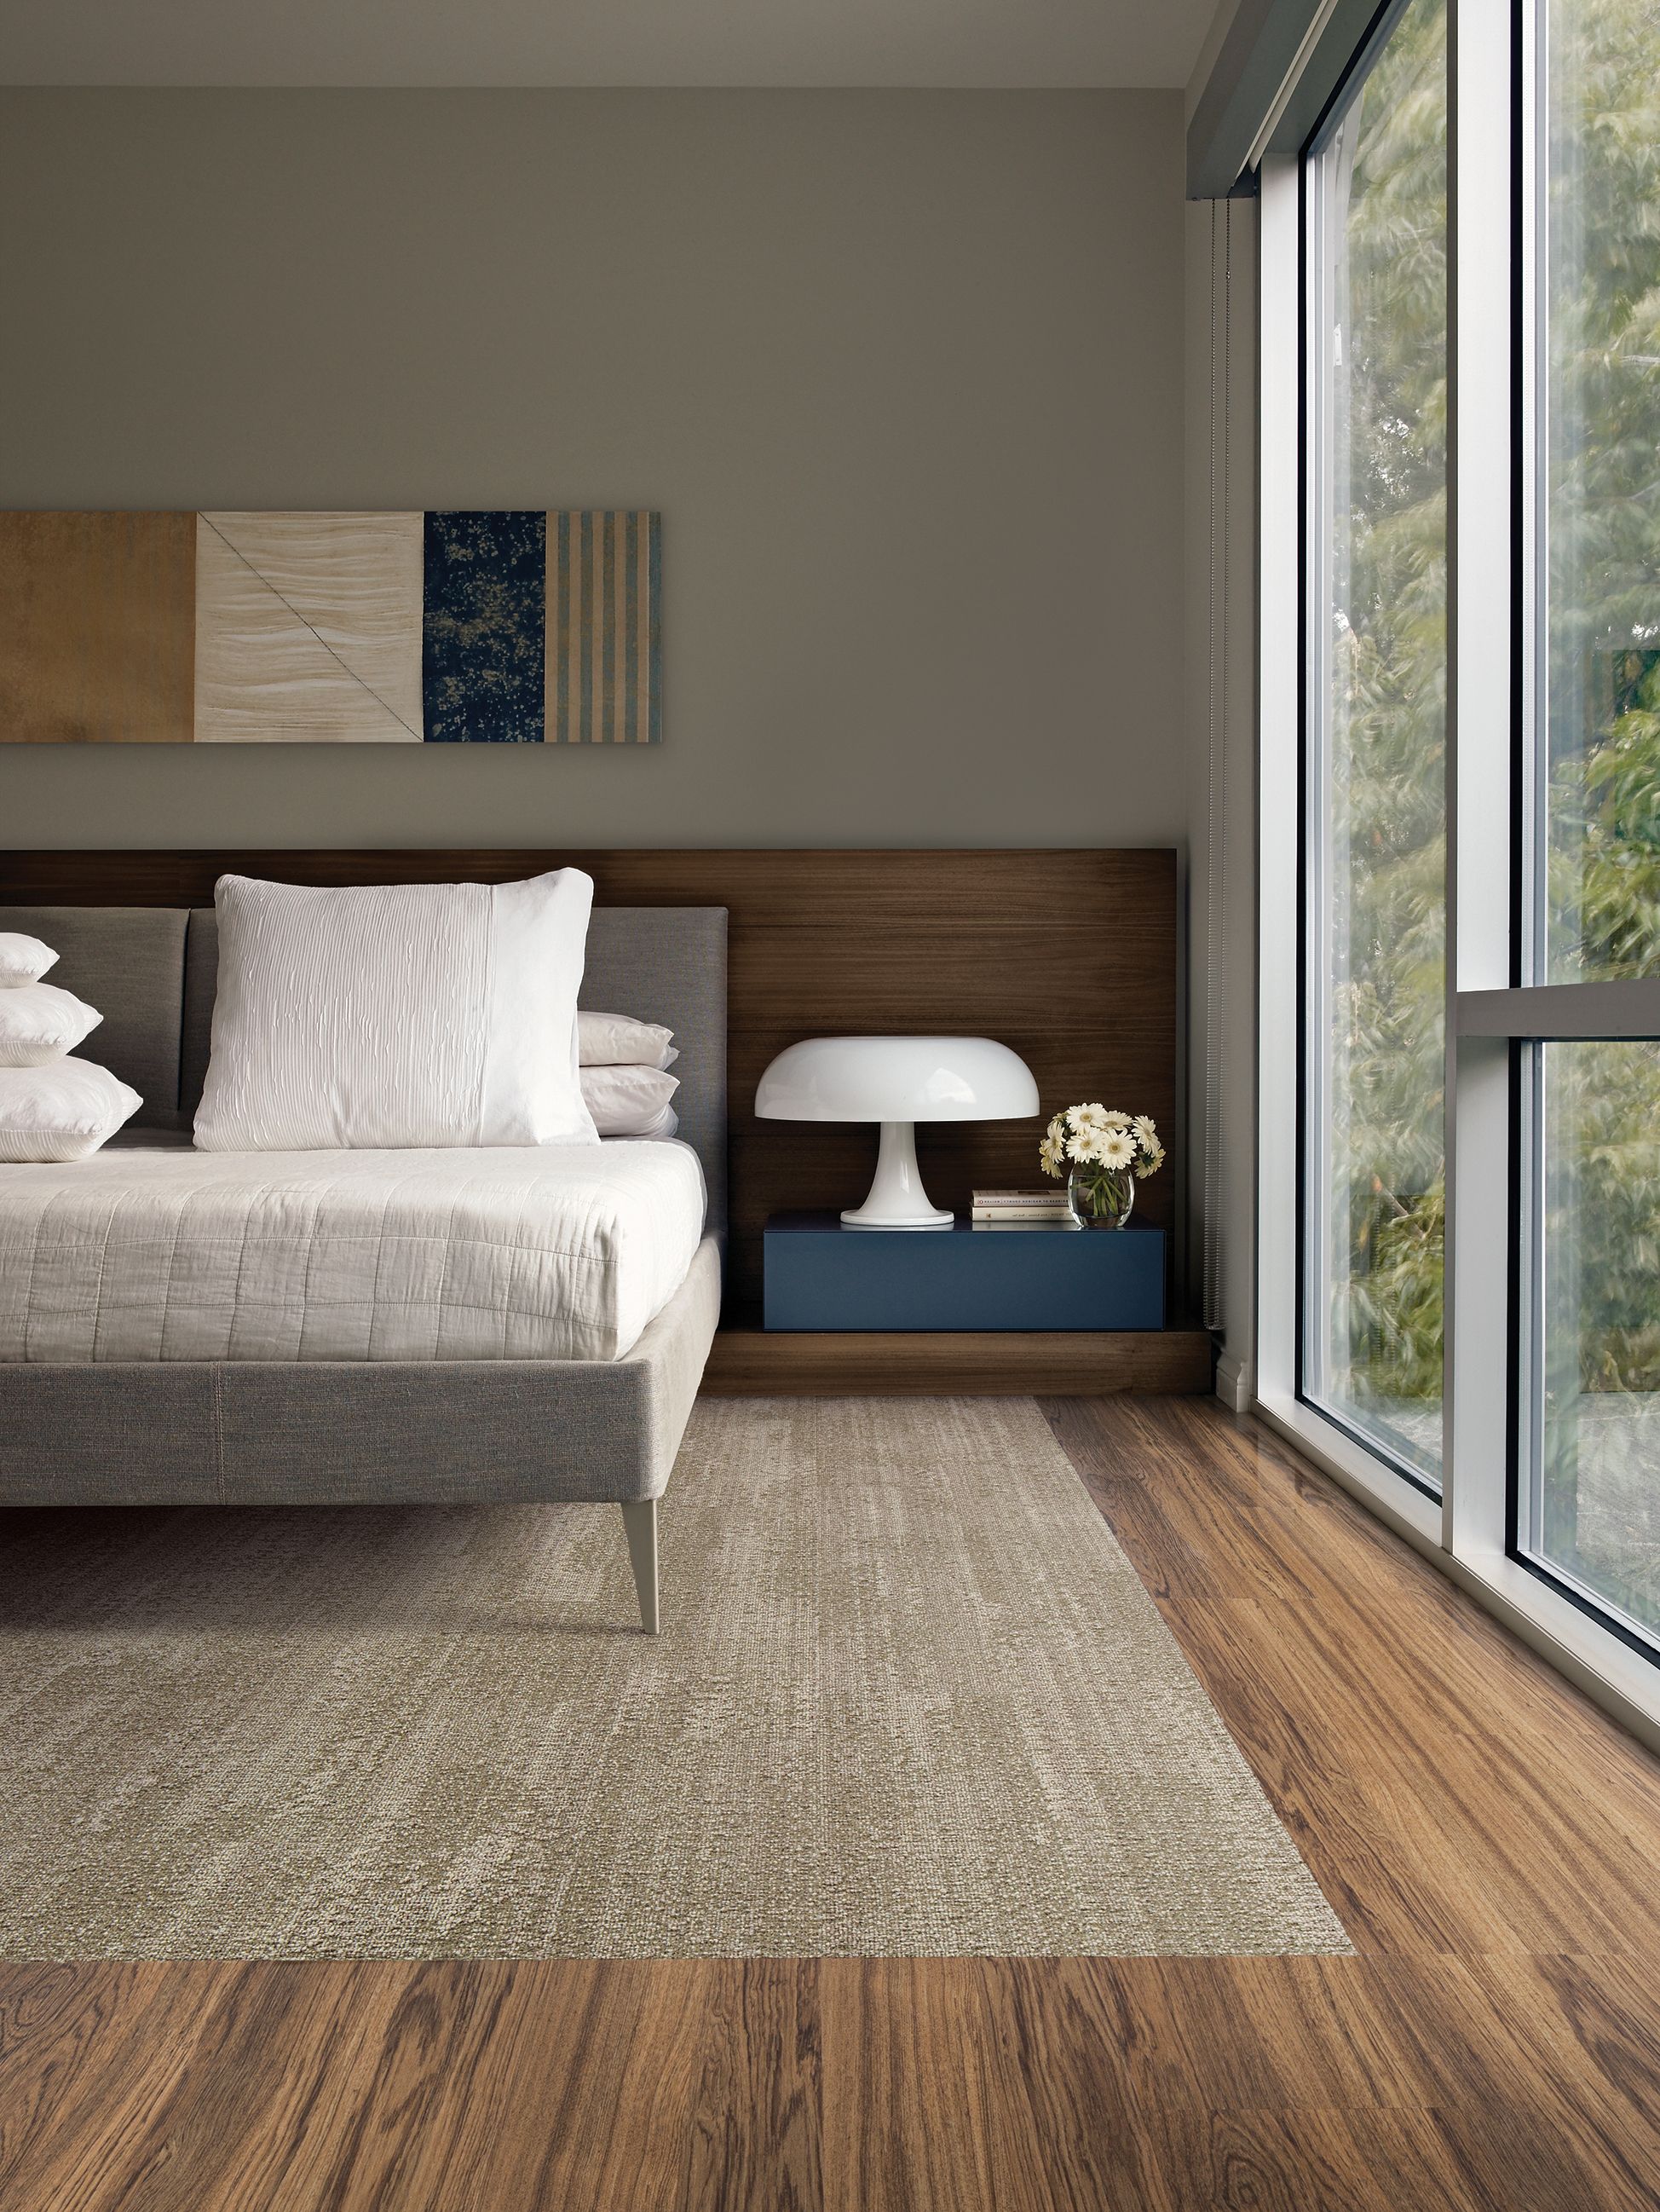 Interface RMS 704 plank carpet tile and Natural Woodgrains LVT in hotel guest room with white lamp imagen número 4